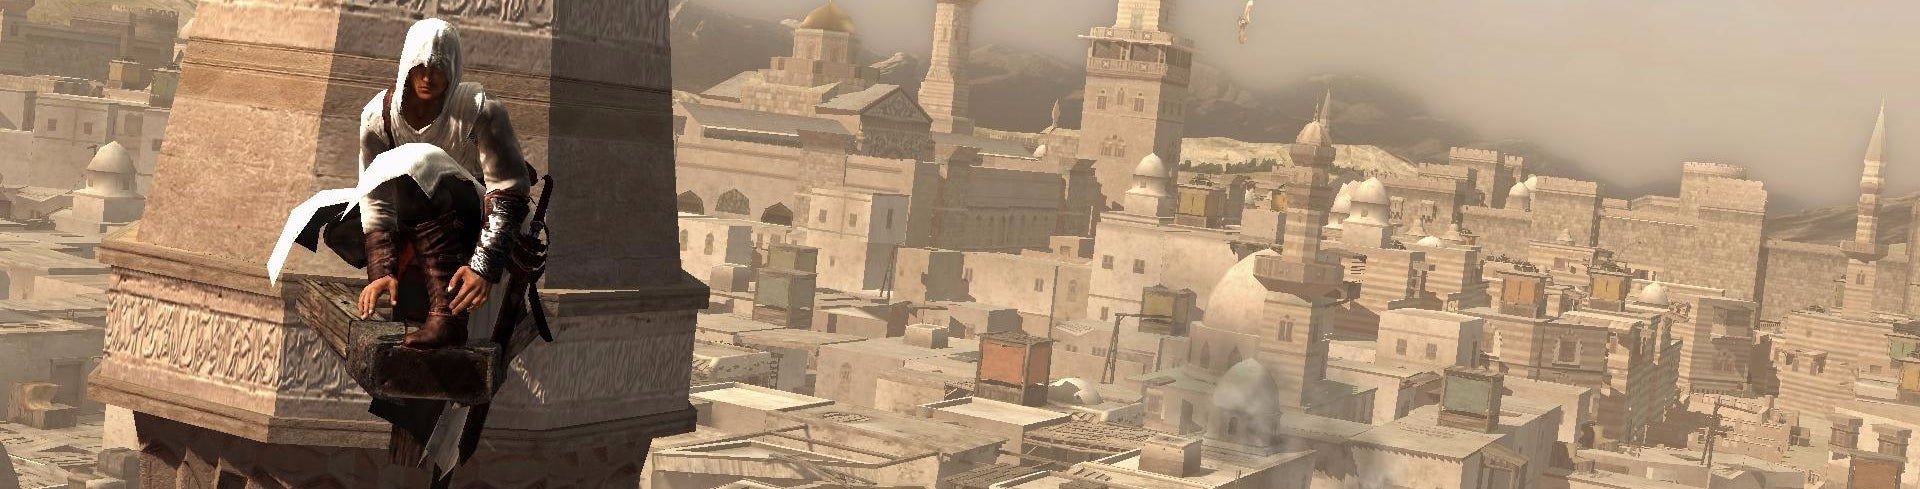 Image for Tracing the ancestry of Assassin's Creed, from Prince of Persia to the Holy Land